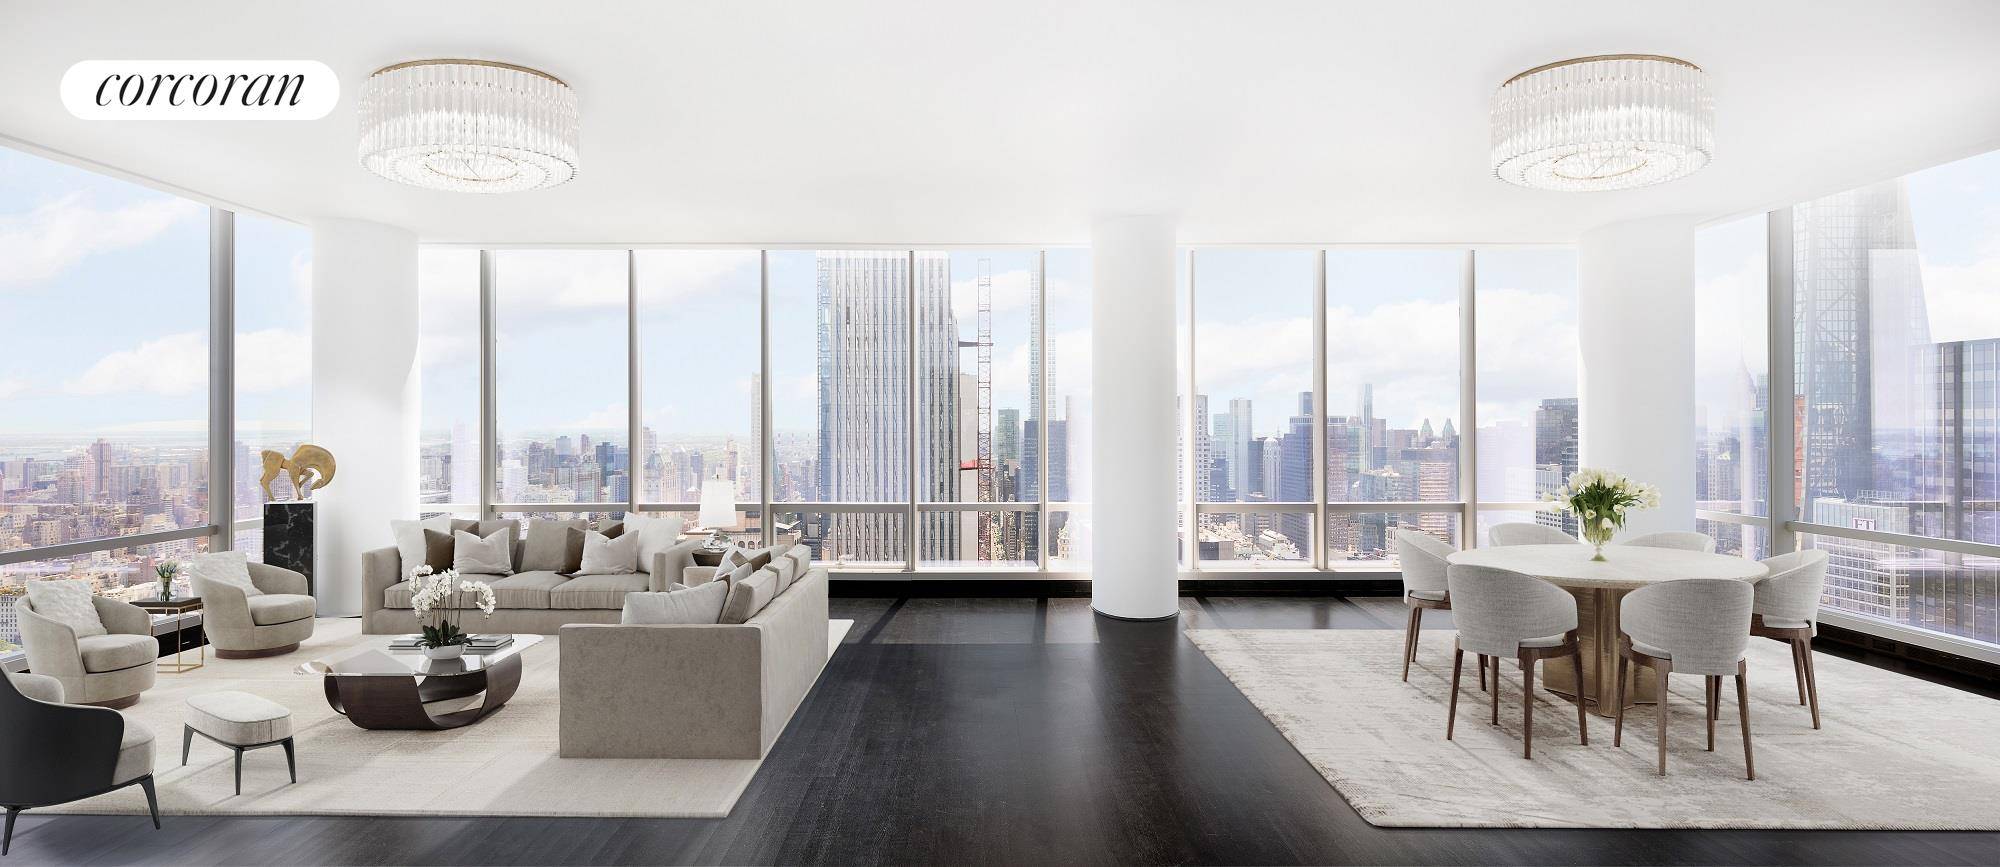 Residence 56C at One57Incomparable Central Park and Skyline ViewsFour Bedrooms Four Baths Powder Room 3, 466 Sq FtThis 56th floor C line residence at One57 offers spectacular views of Central ...